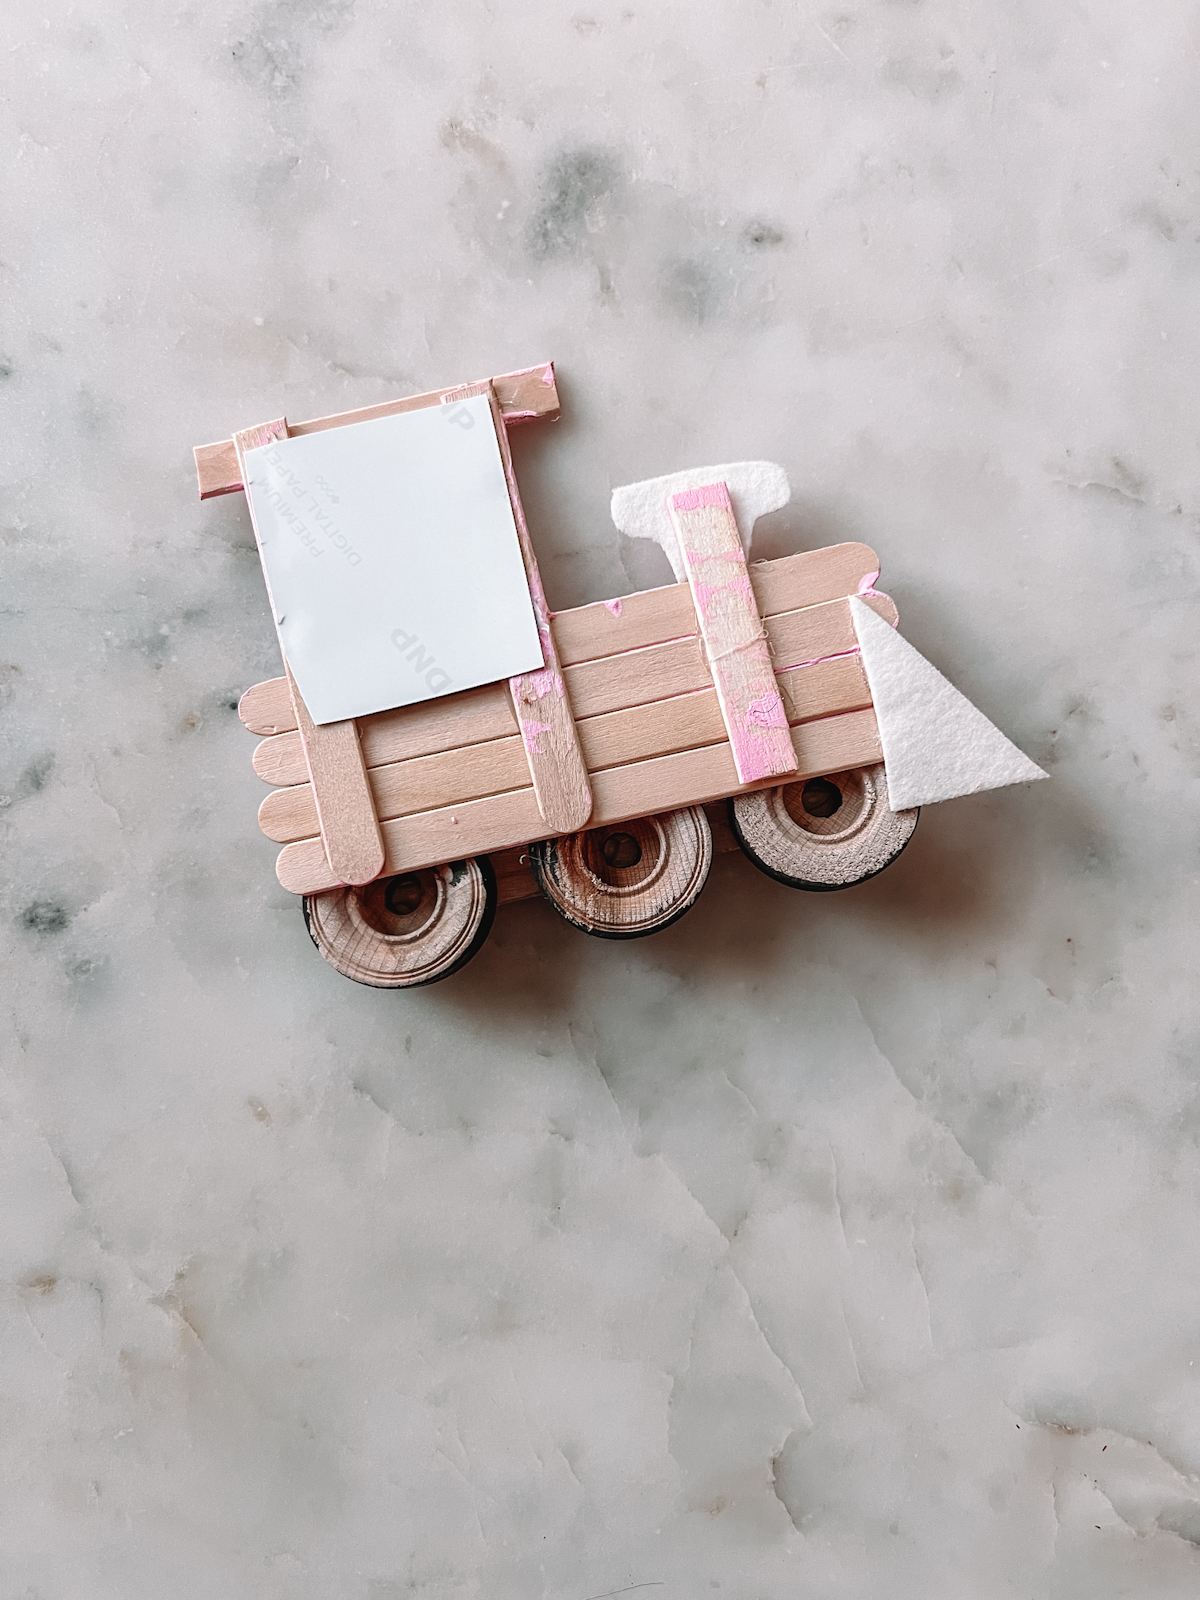 popsicle stick train upside down on table